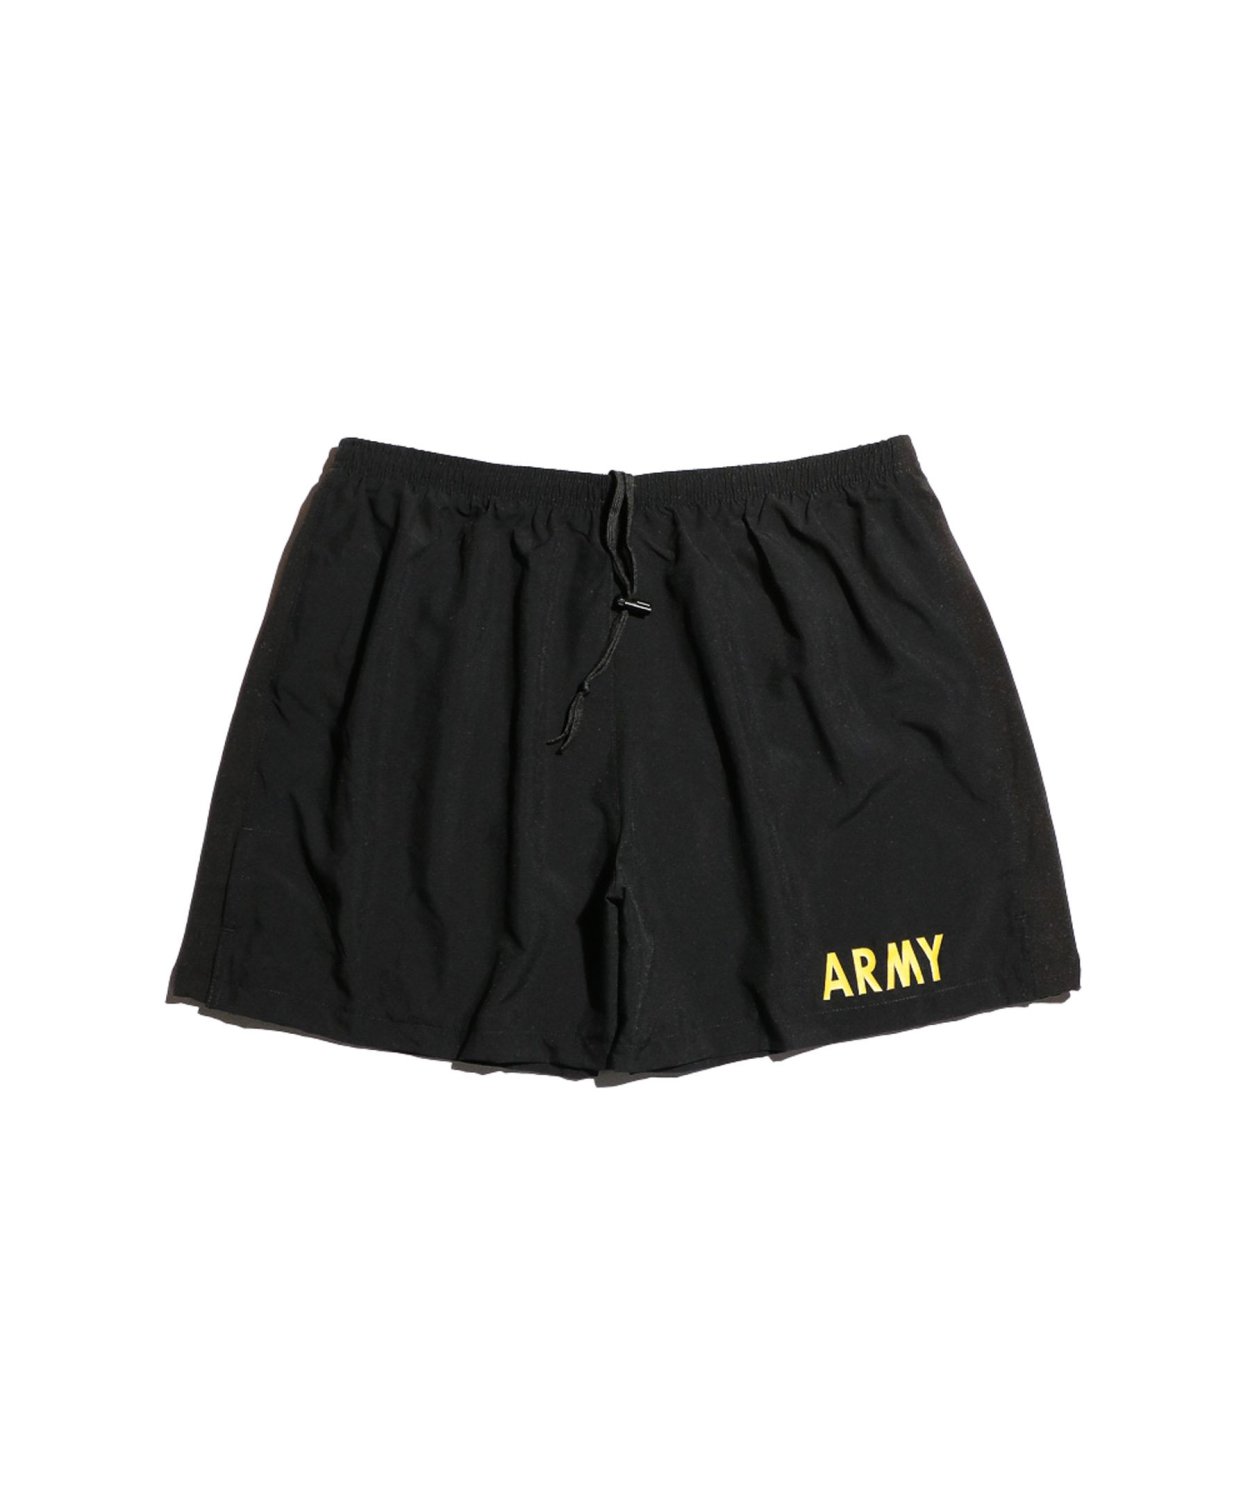 U.S MILITARY / US ARMY TRAINING SHORTS DEADSTOCK MADE BY SOFFE